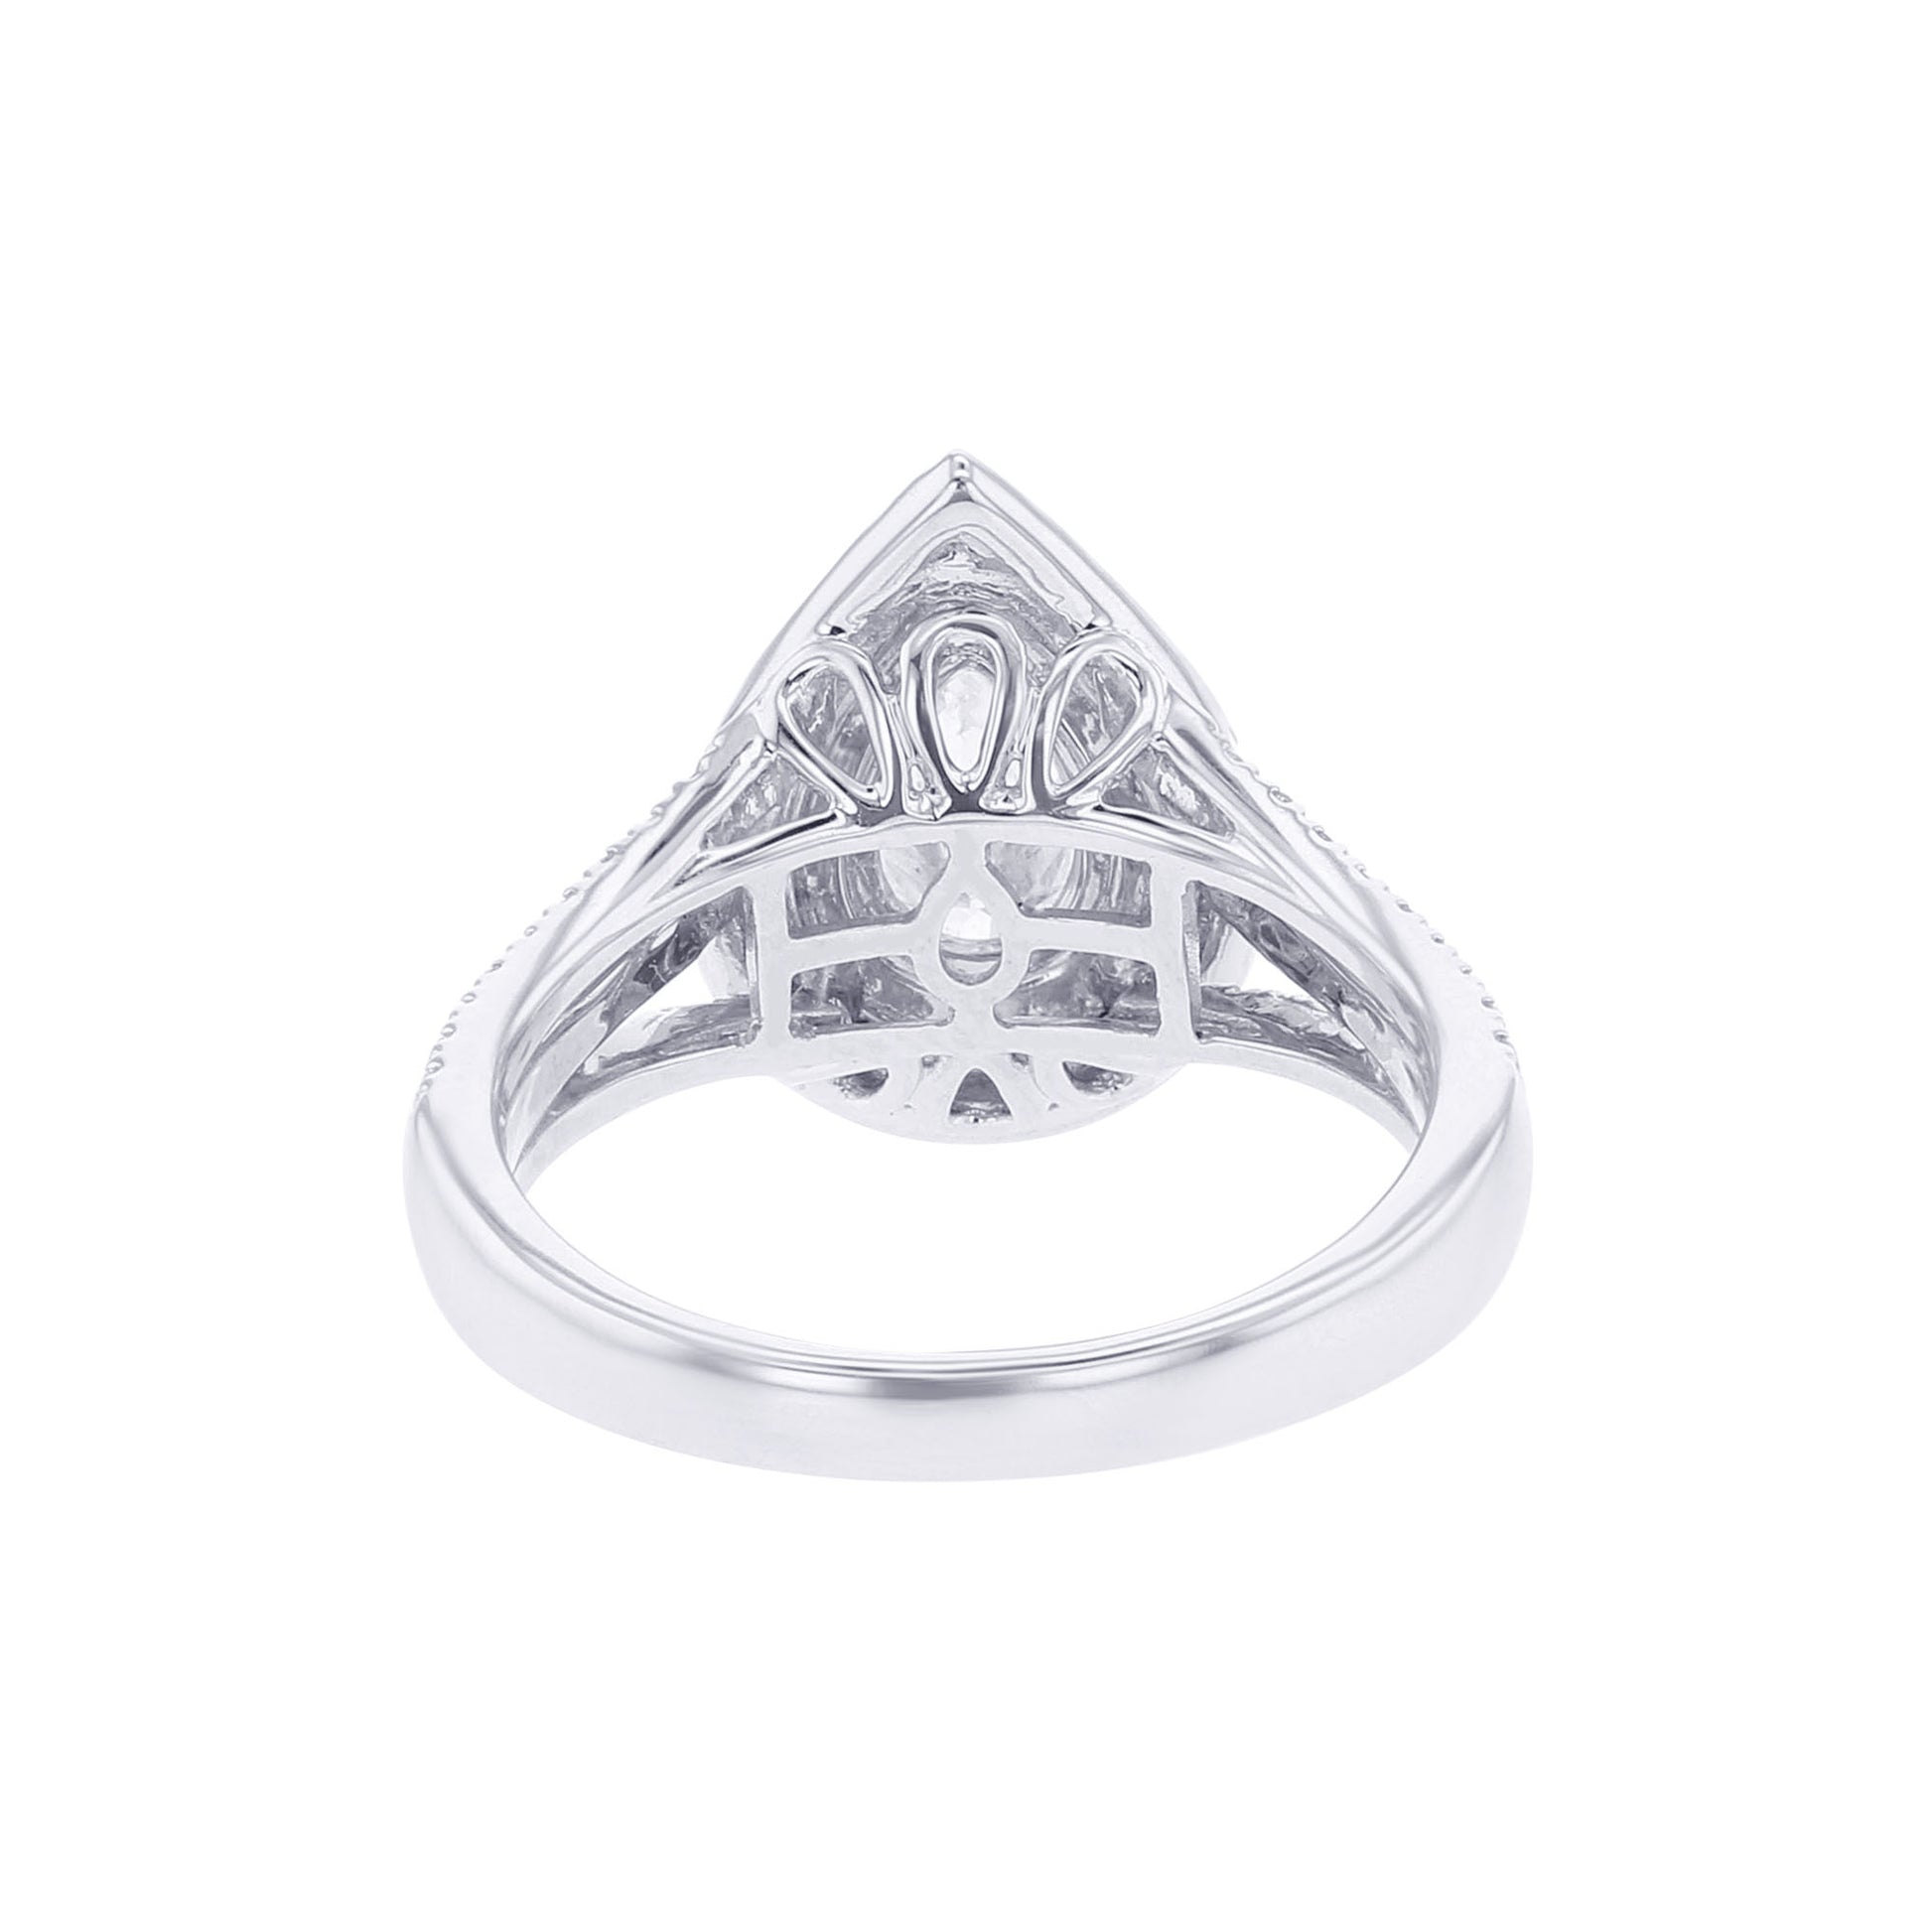 Millie Pear Double Halo Ready for Love Diamond Engagement Ring